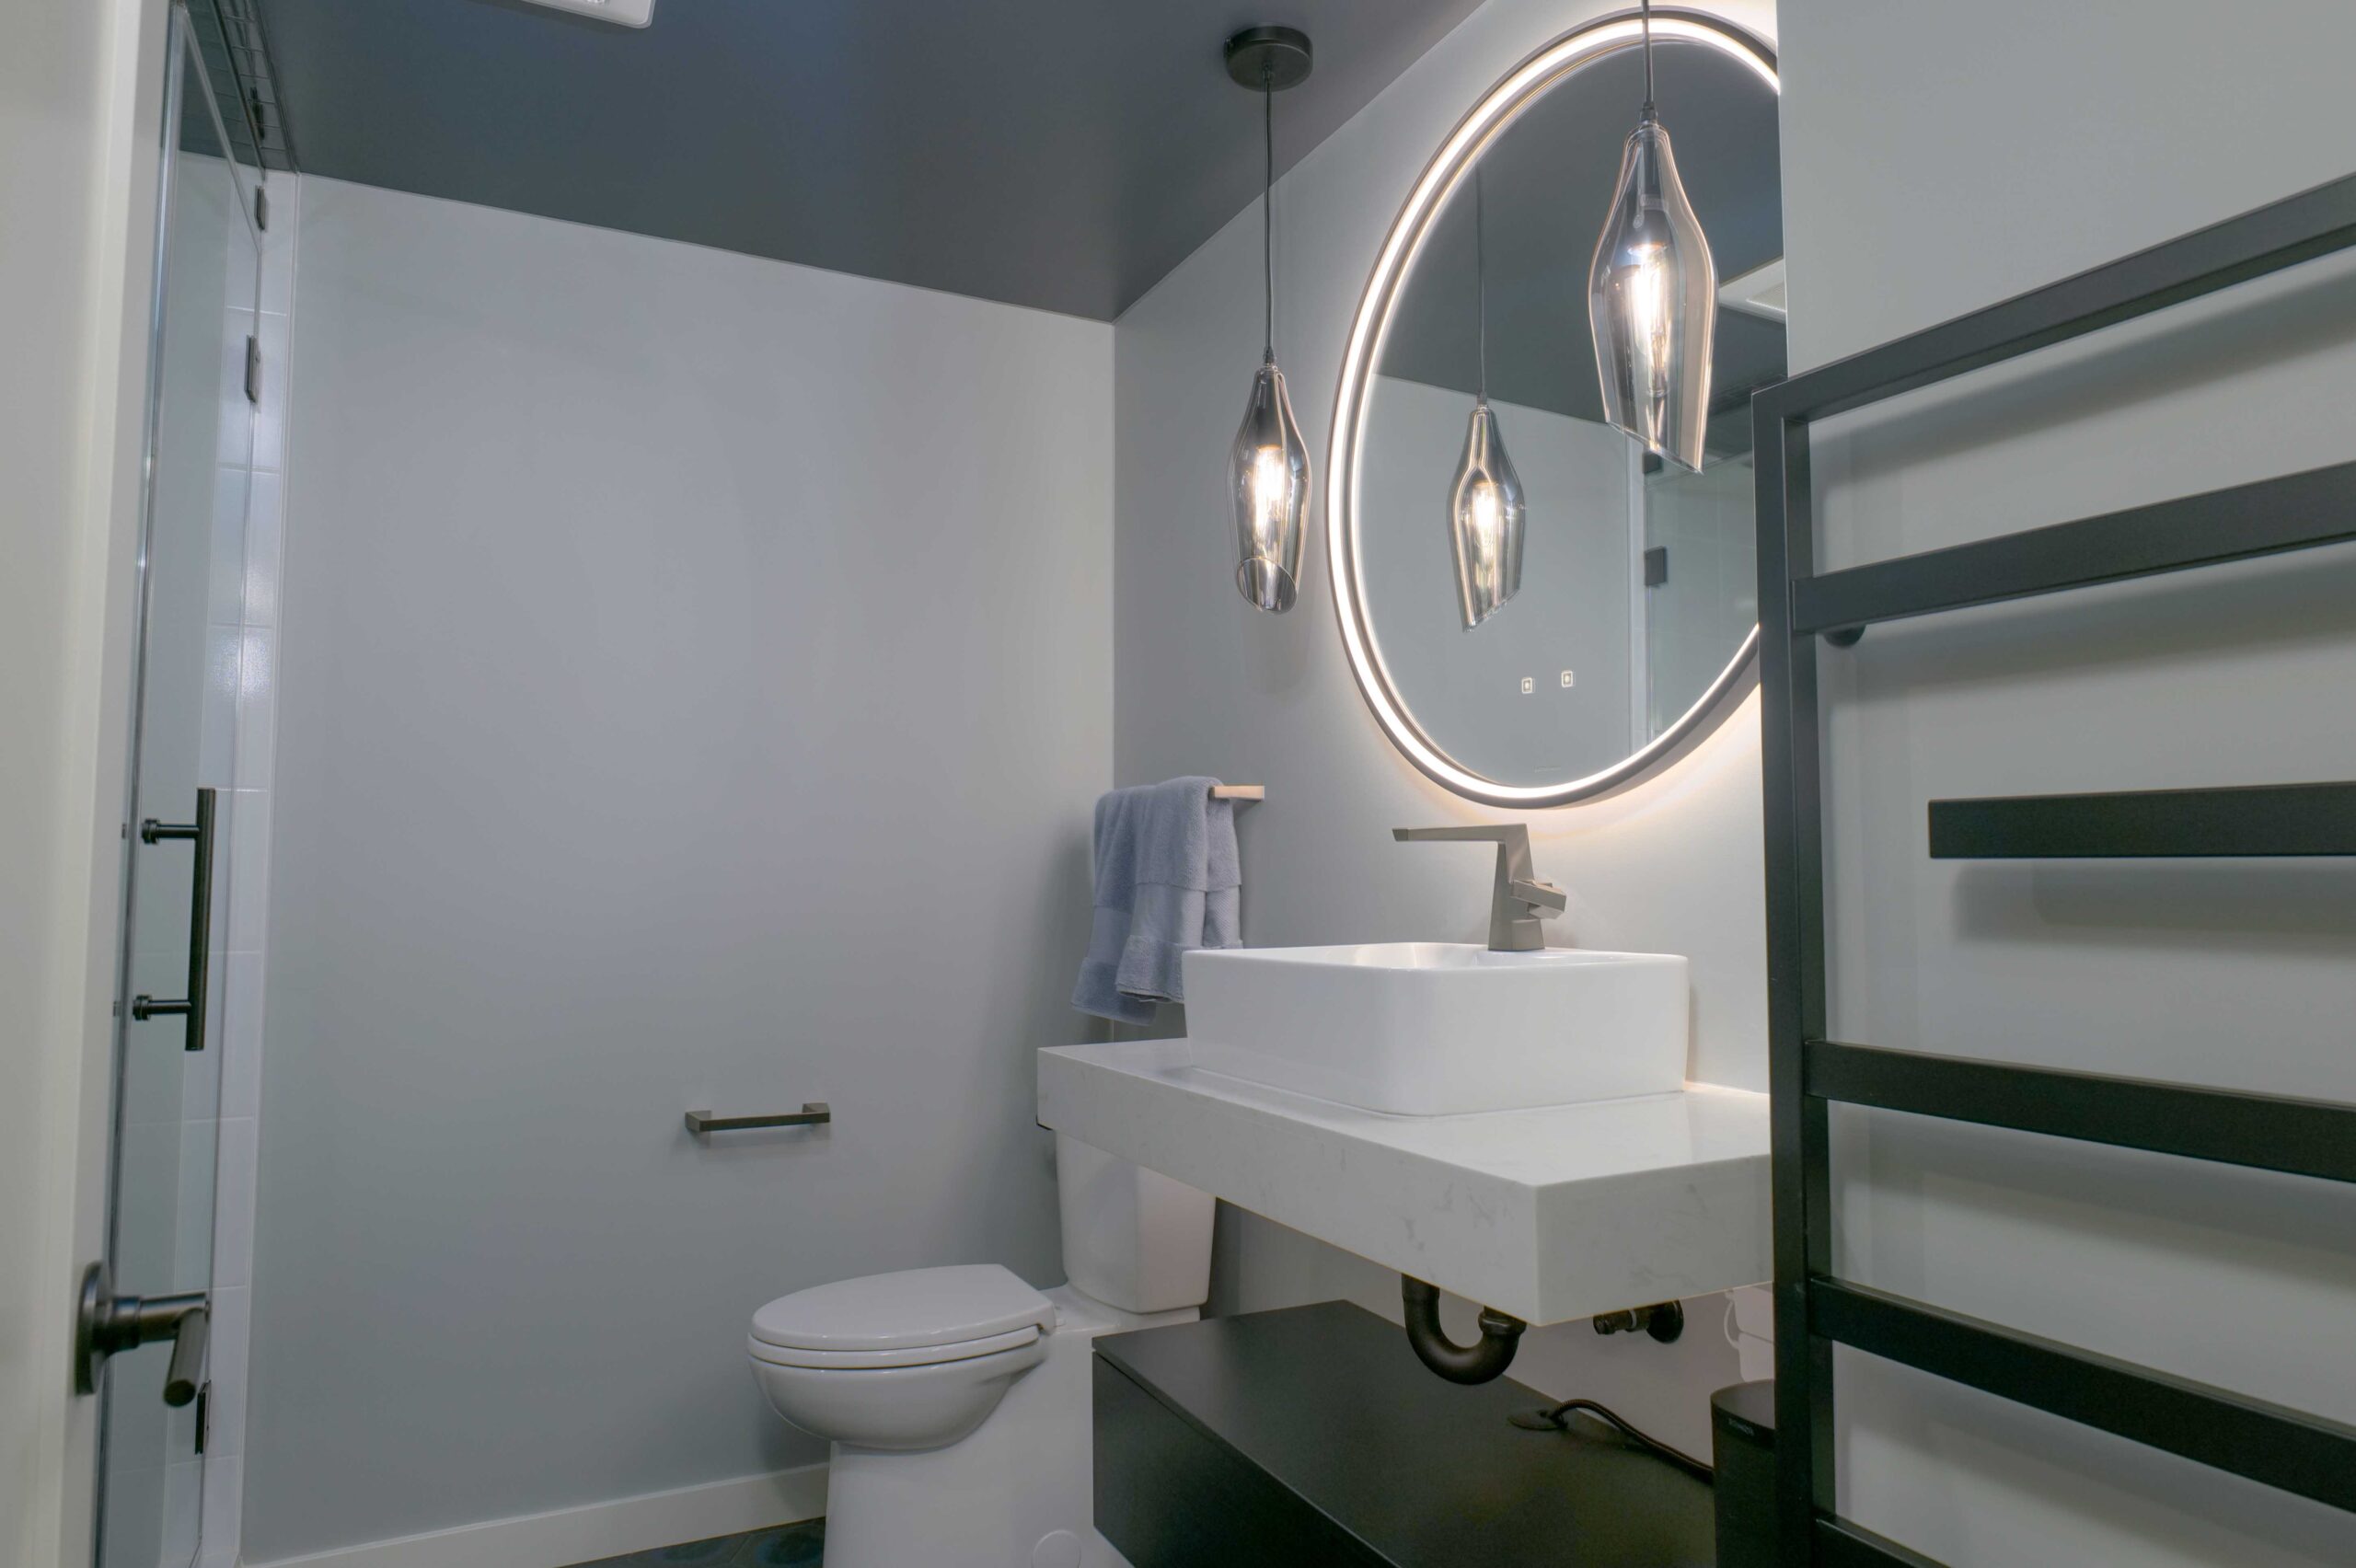 A modern bathroom with a round mirror above the sink in an Orchard Lake remodel.